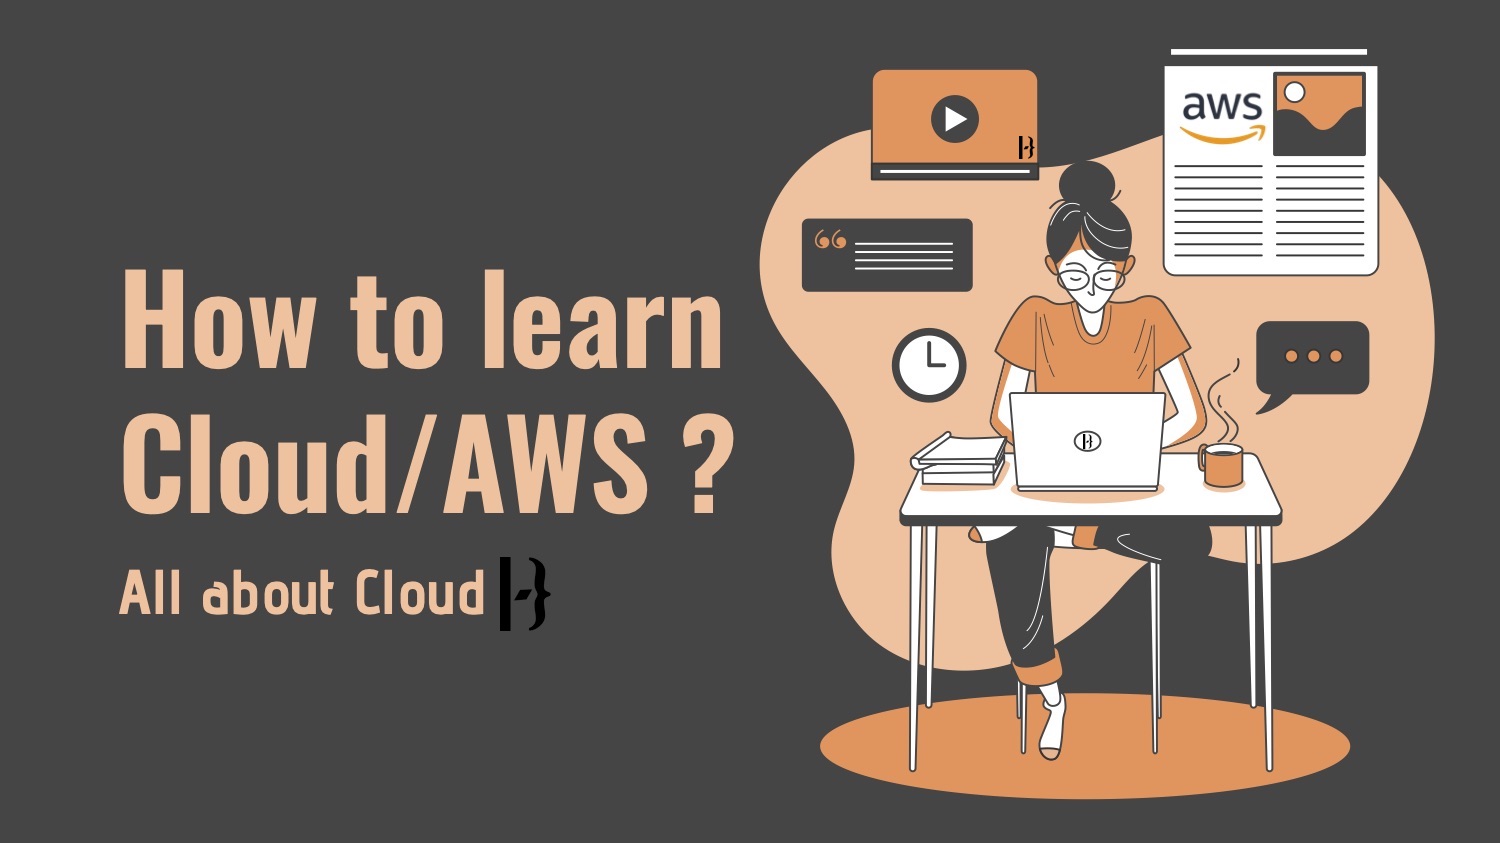 How to learn AWS Cloud?